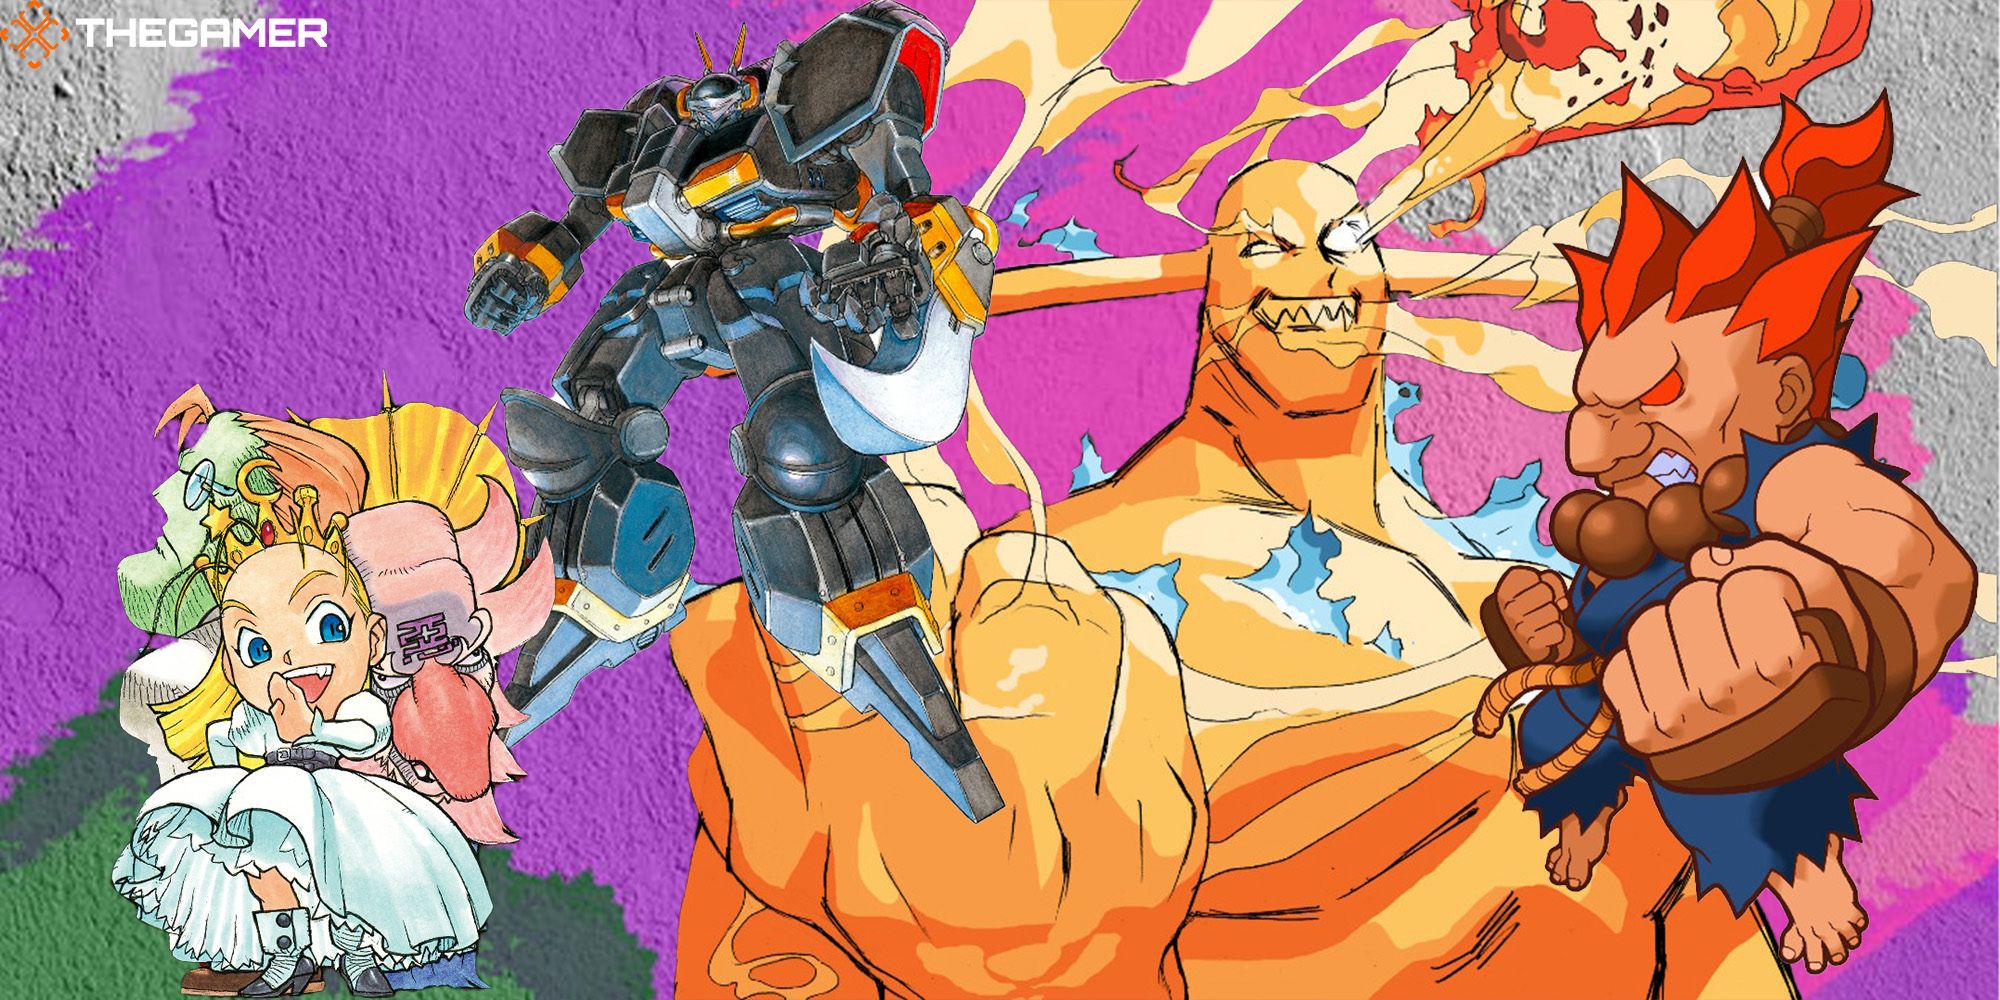 Several secret characters from Capcom Fighting Collection, like Devilot, Warlock, Pyron, and Akuma, stand against a concrete wall adorned with neon spray paint.